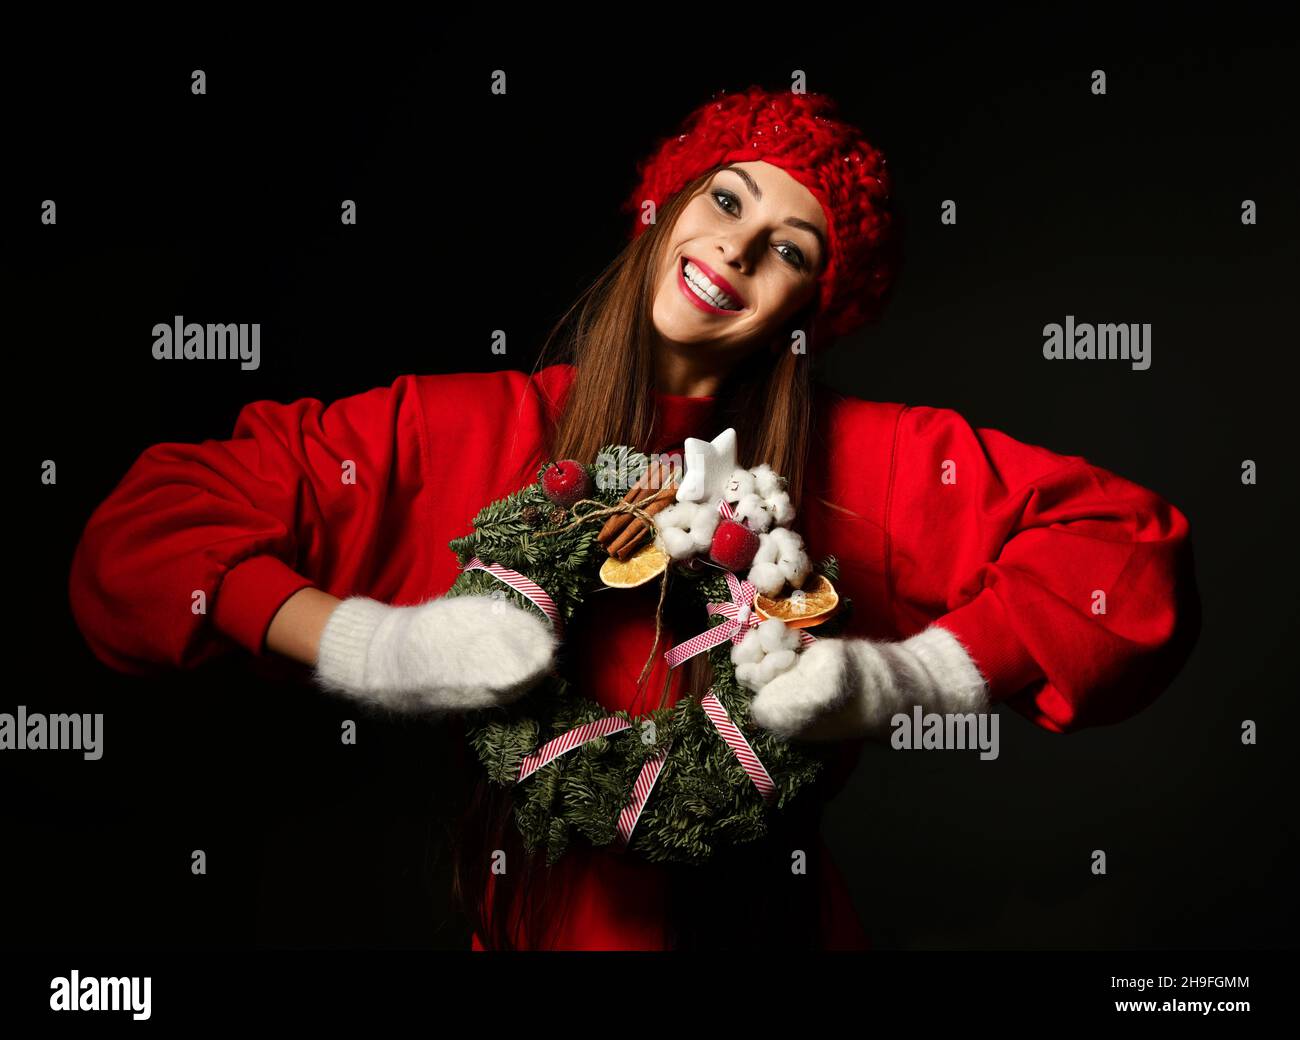 Happy cheerful woman in red winter sweater, warm knitted hat and mittens holds decorated Christmas ornate wreath  Stock Photo